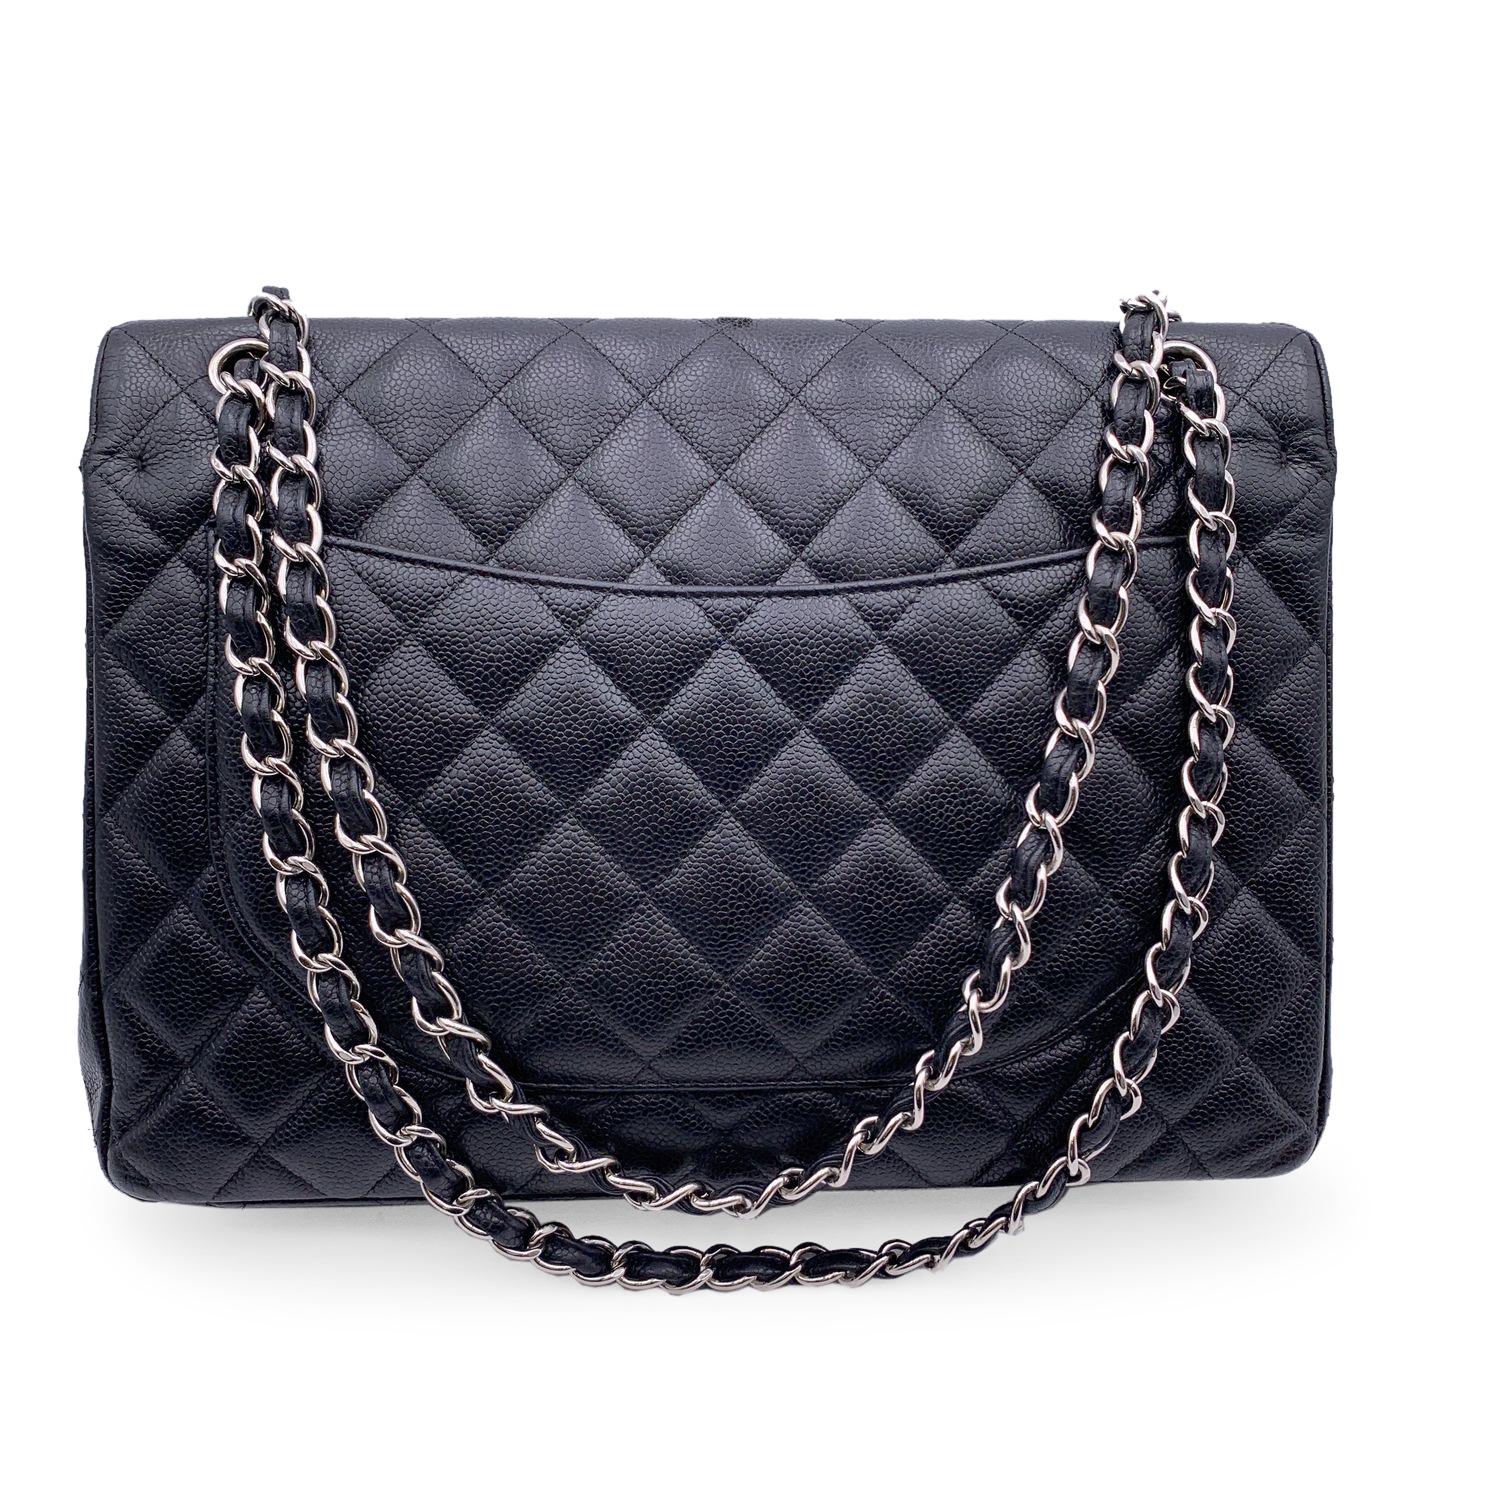 Chanel Black Quilted Caviar Maxi Timeless Classic 2.55 Double Flap Bag In Excellent Condition For Sale In Rome, Rome